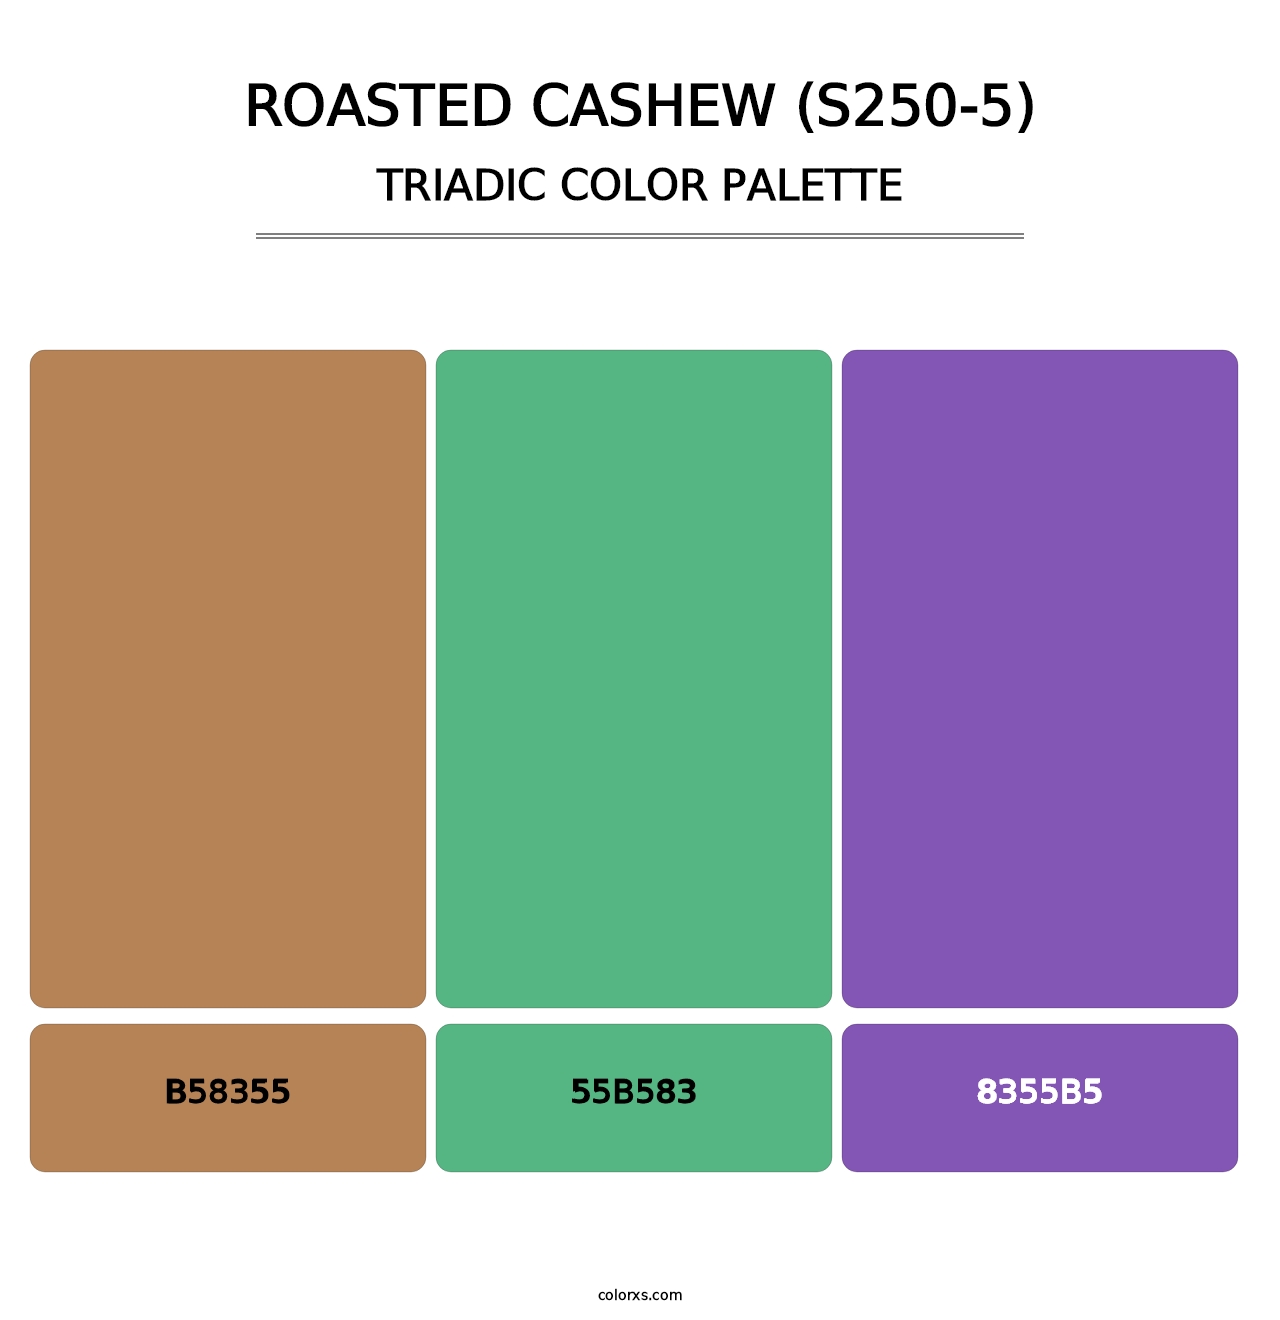 Roasted Cashew (S250-5) - Triadic Color Palette